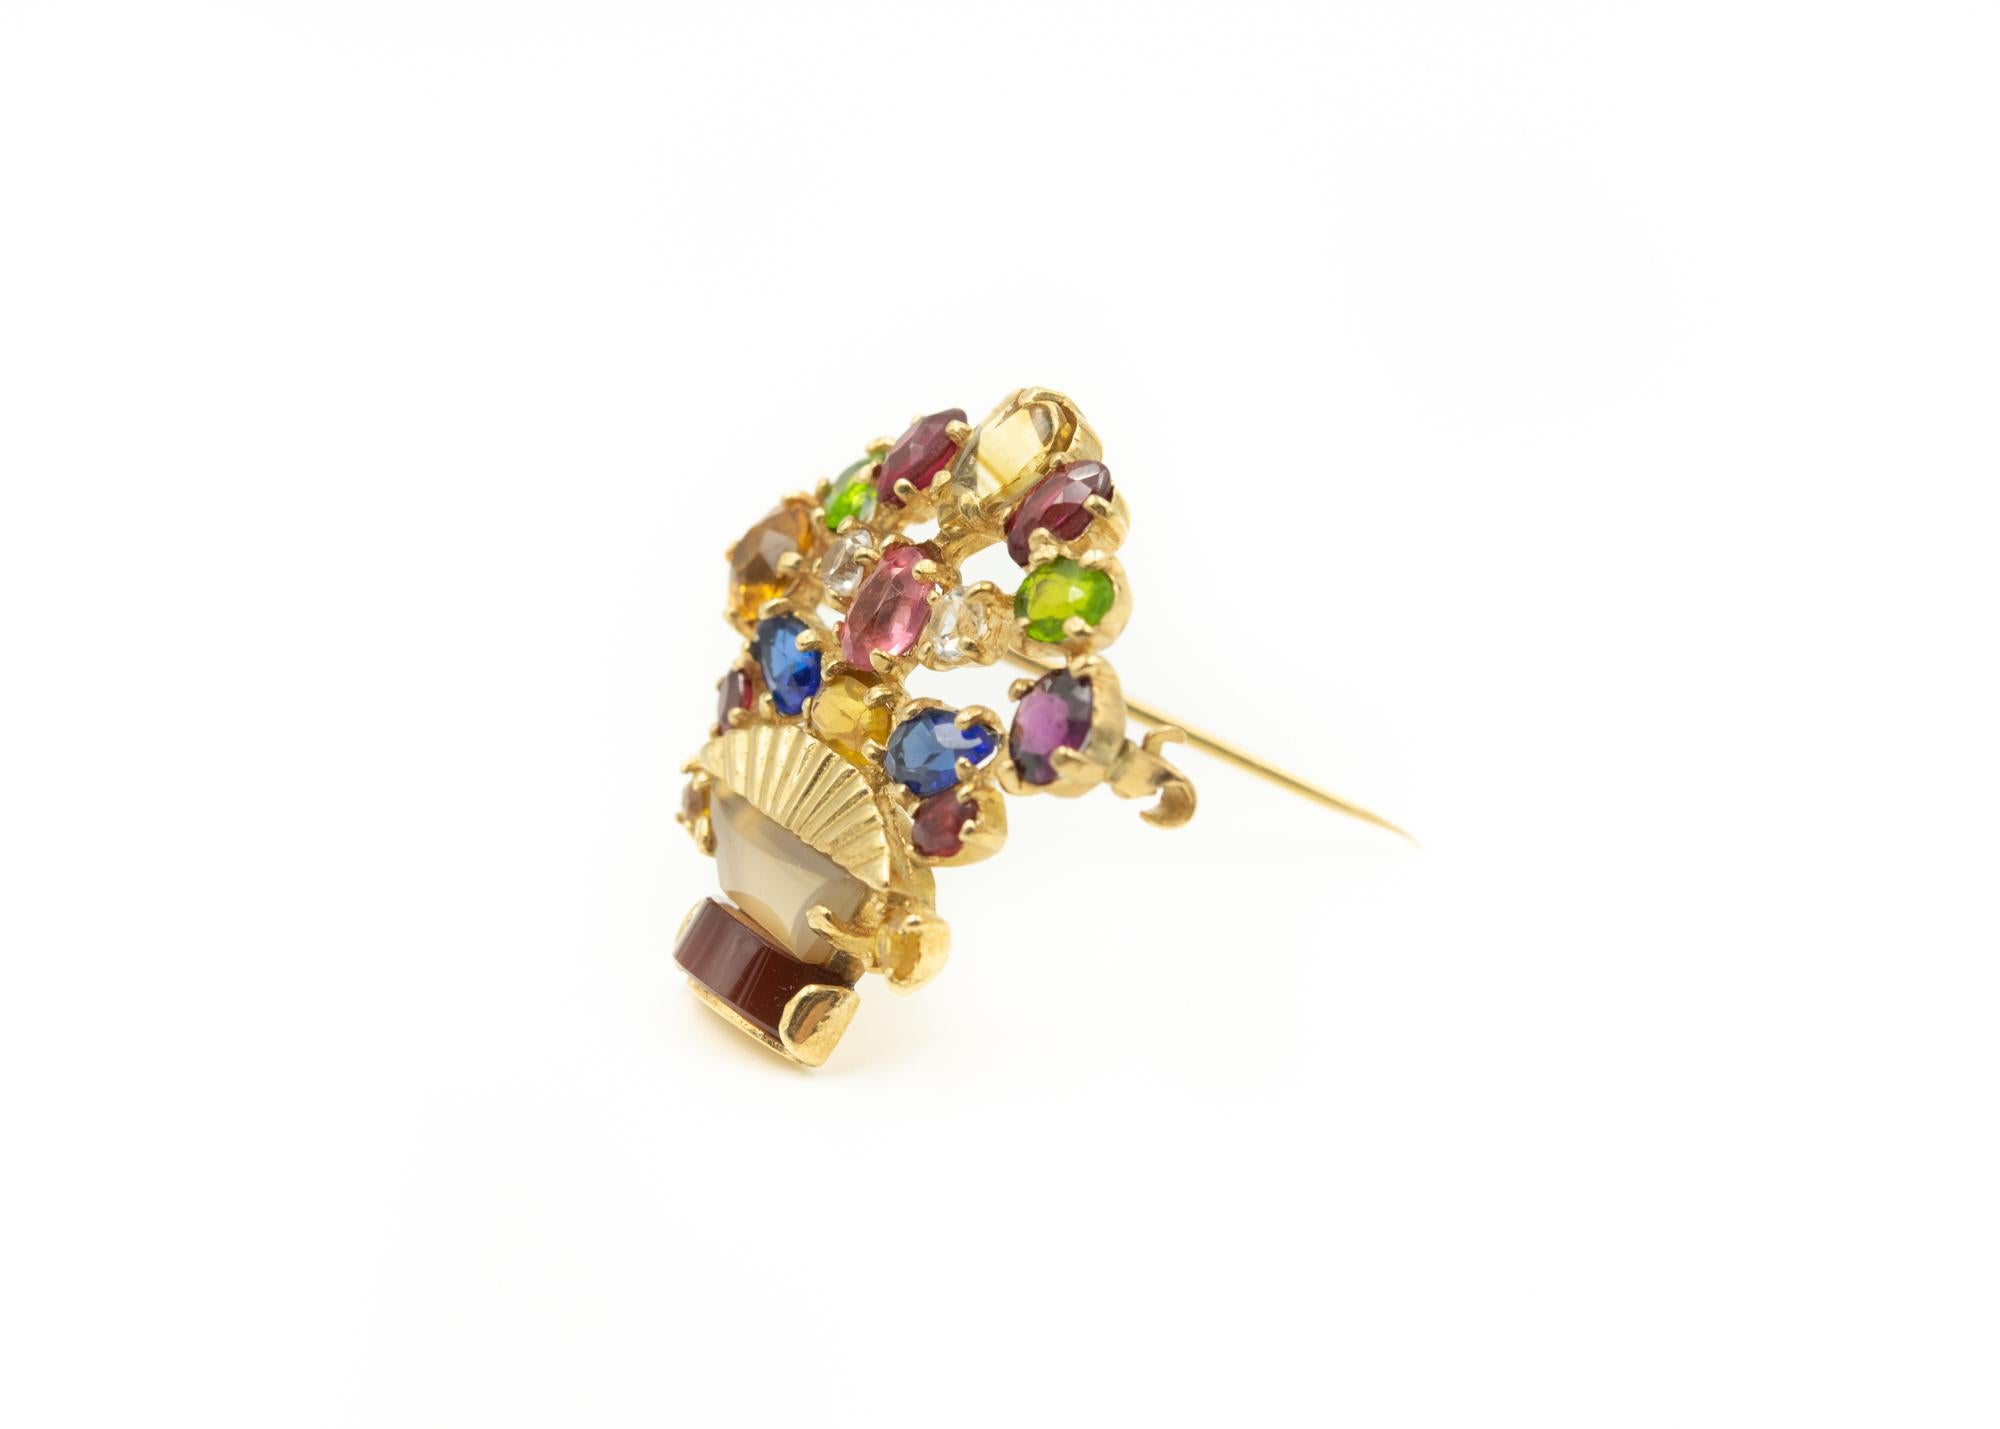 Retro (1940s - early 1950s) flower basket brooch featuring a basket made of agate, rock crystal quartz and 14k yellow gold.  The flowers are rubies, sapphires, diamonds, tourmaline, garnet, citrine and peridot.